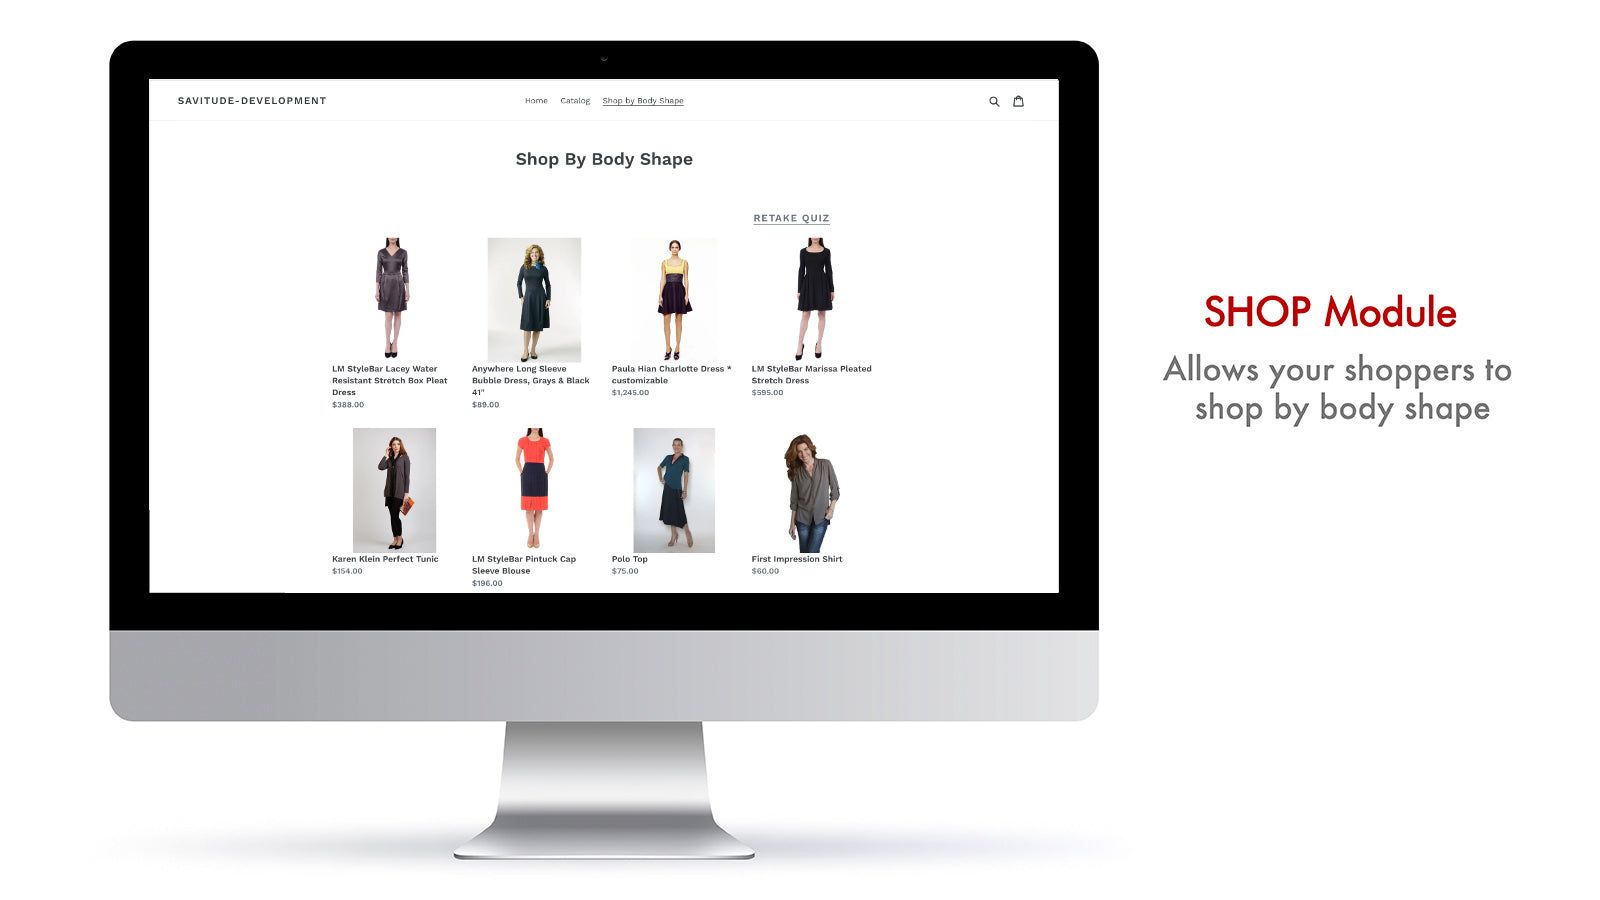 Savitude's SHOP module recommends optimal pieces for body shape